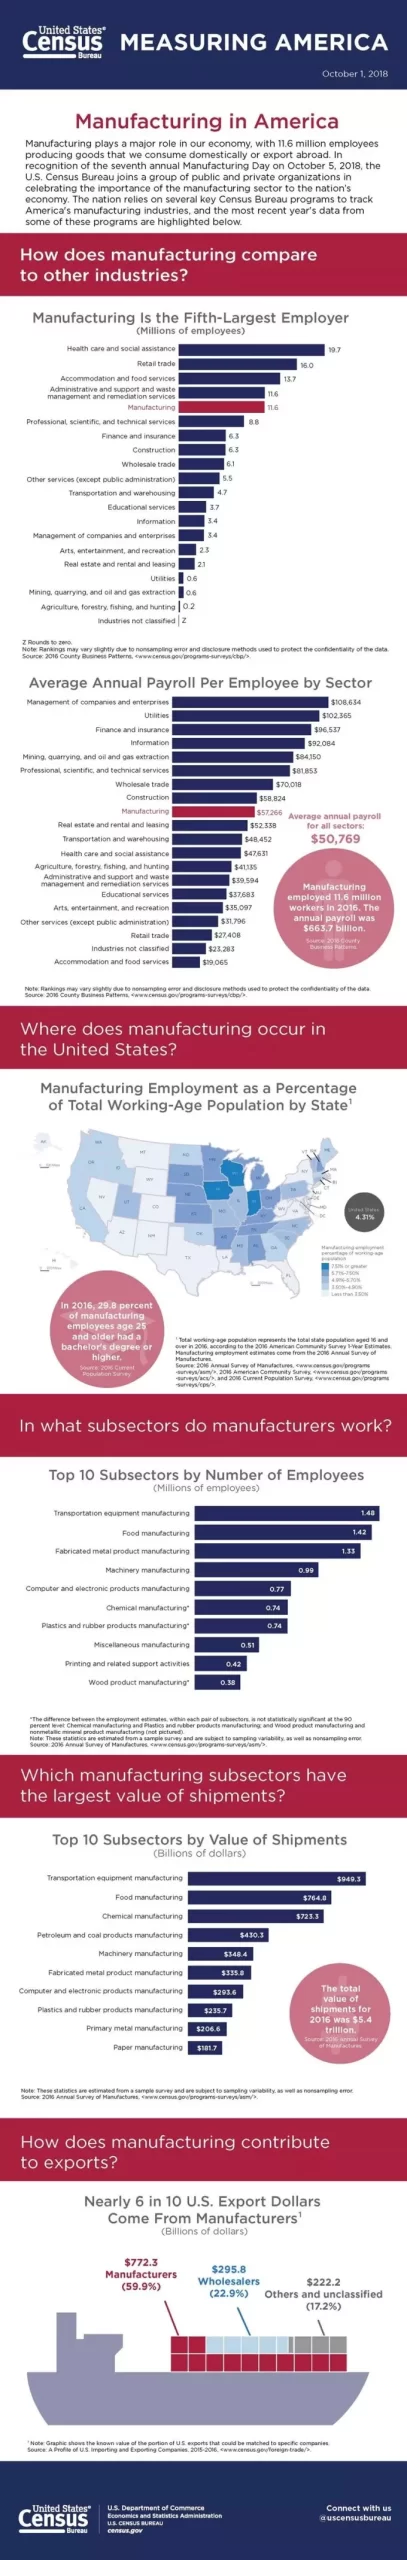 infographic-manufacturing-in-america-scaled.webp